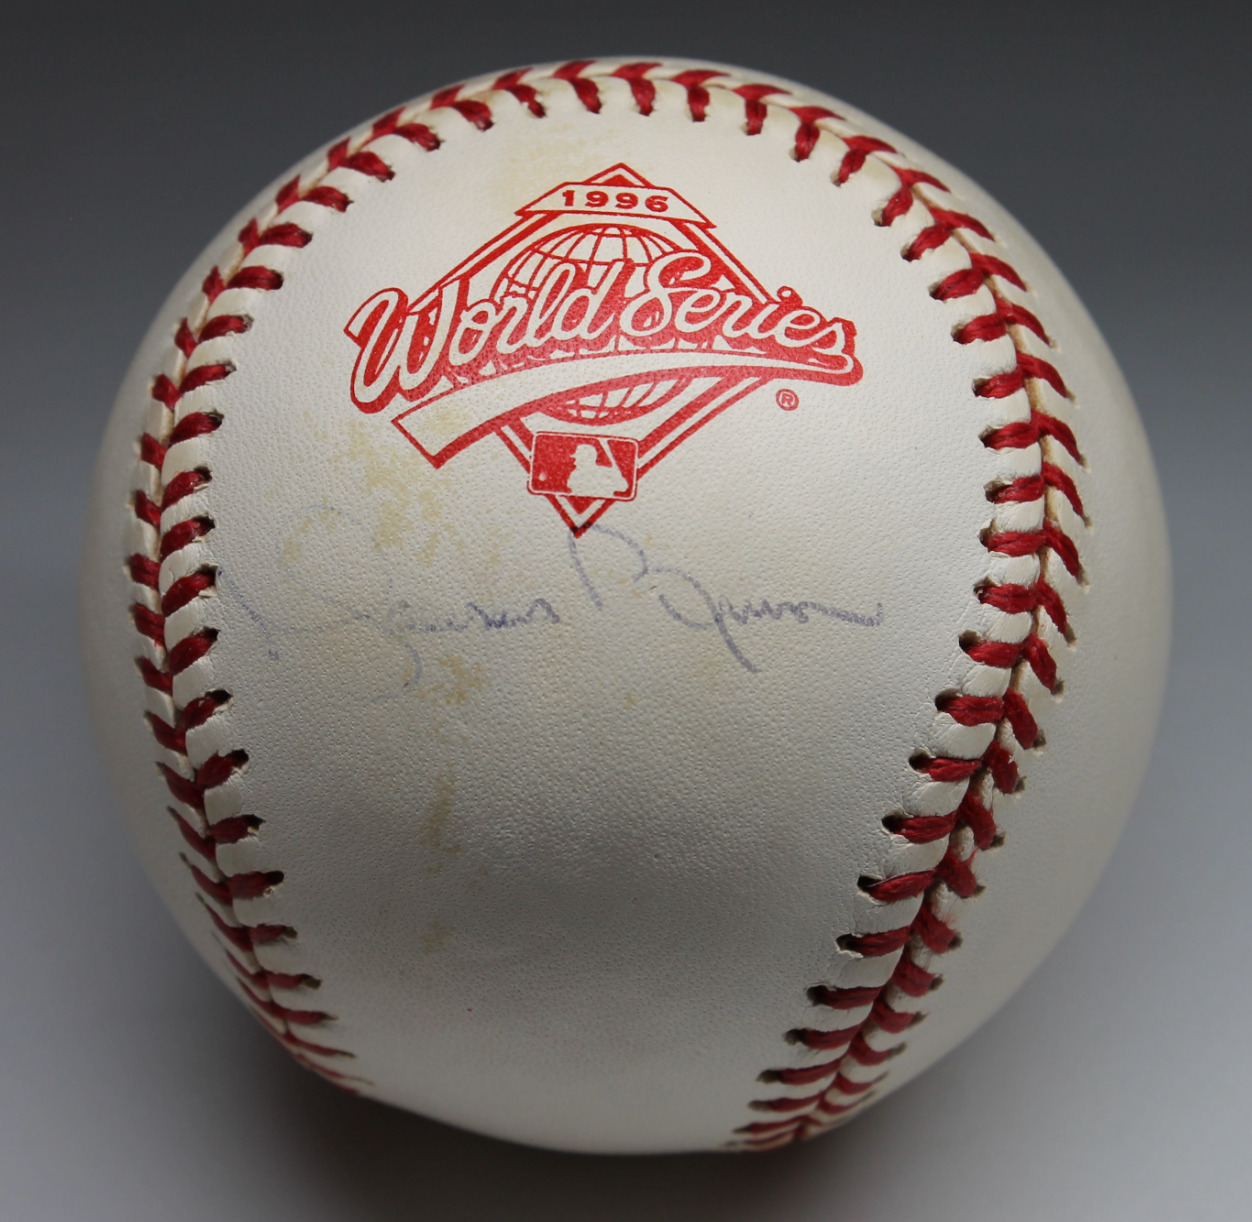 Mariano Rivera signed autographed 1996 World Series baseball Steiner